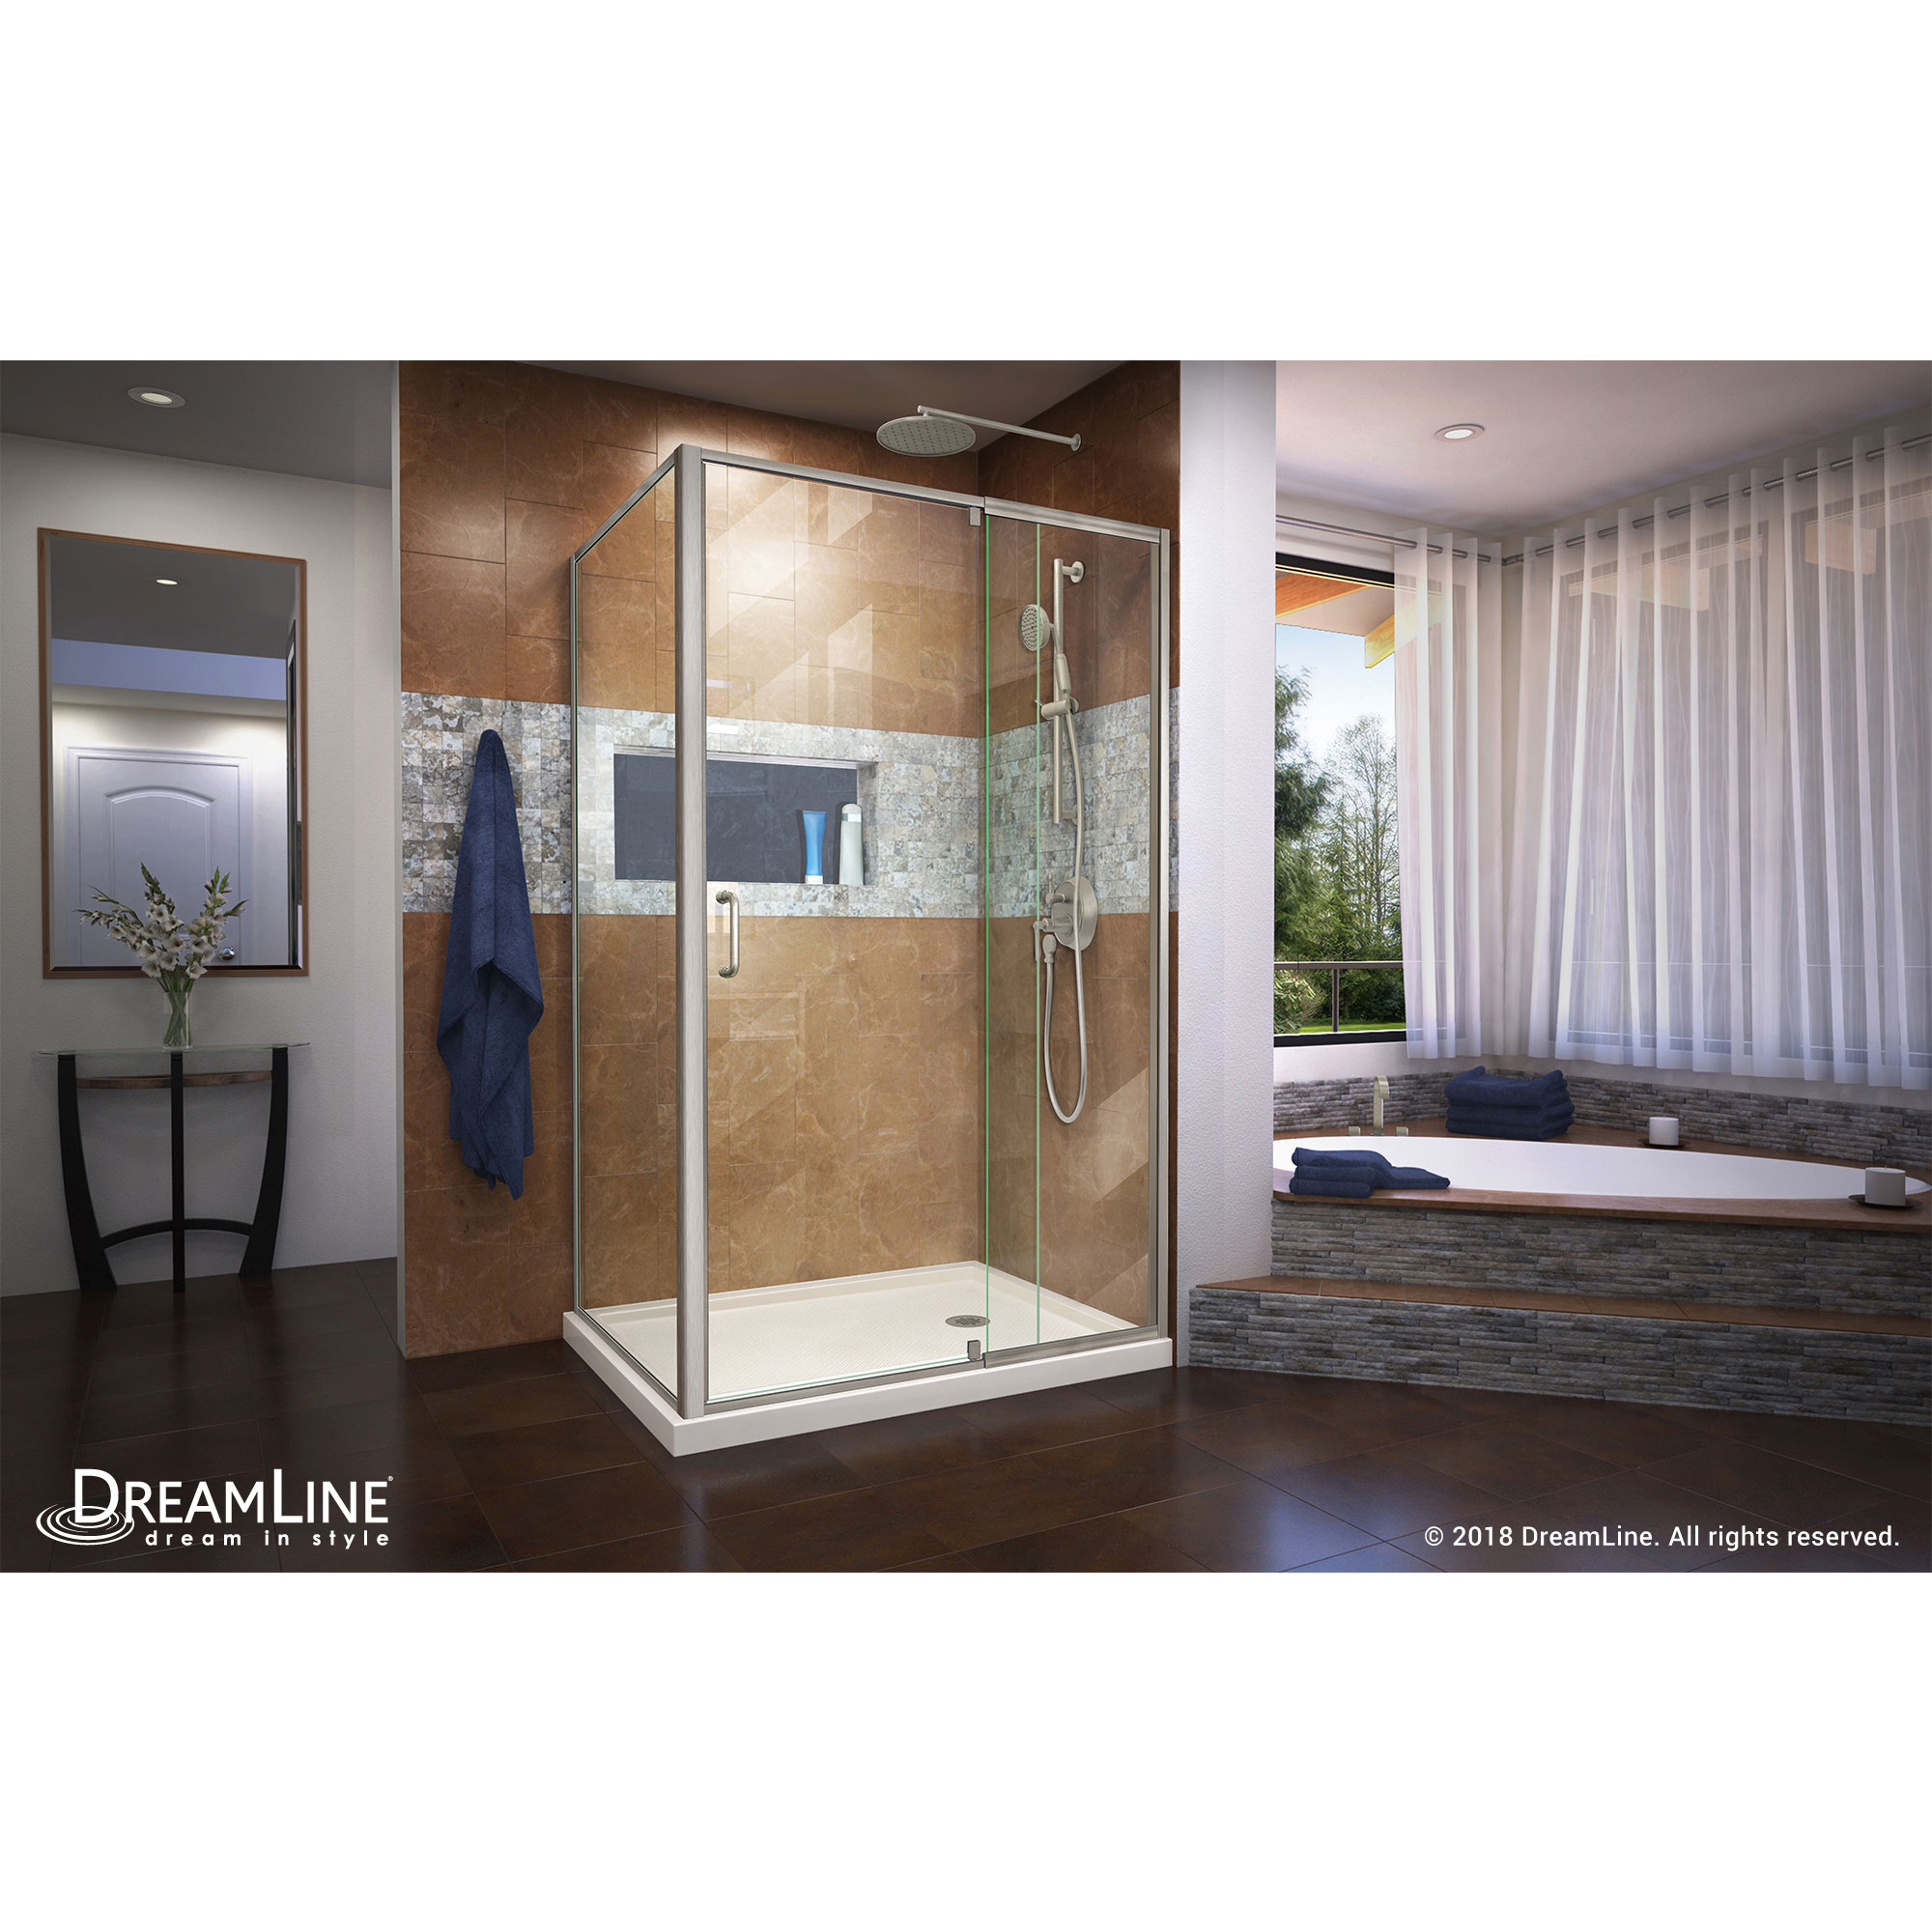 DreamLine Flex 36 in. D x 48 in. W x 74 3/4 in. H Semi-Frameless Shower Enclosure in Brushed Nickel with Right Drain Biscuit Bas